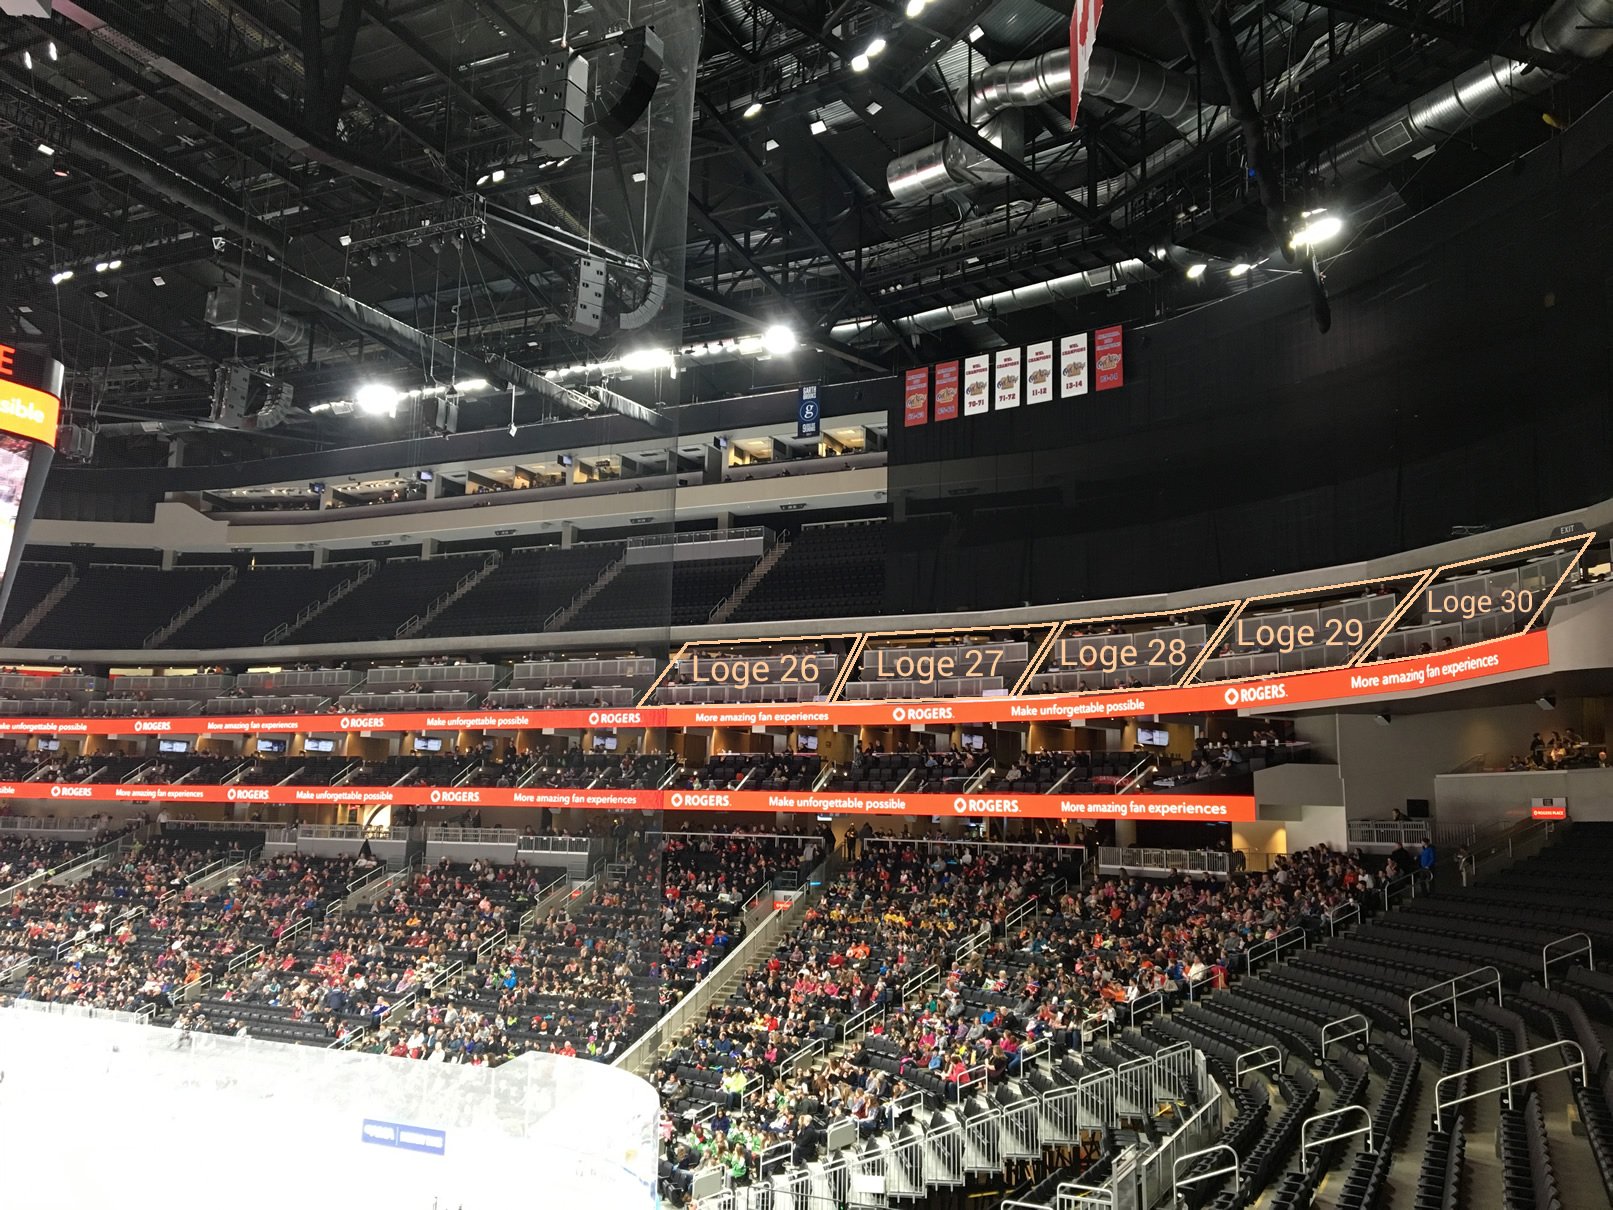 Loge Sections 26-30 at Rogers Place